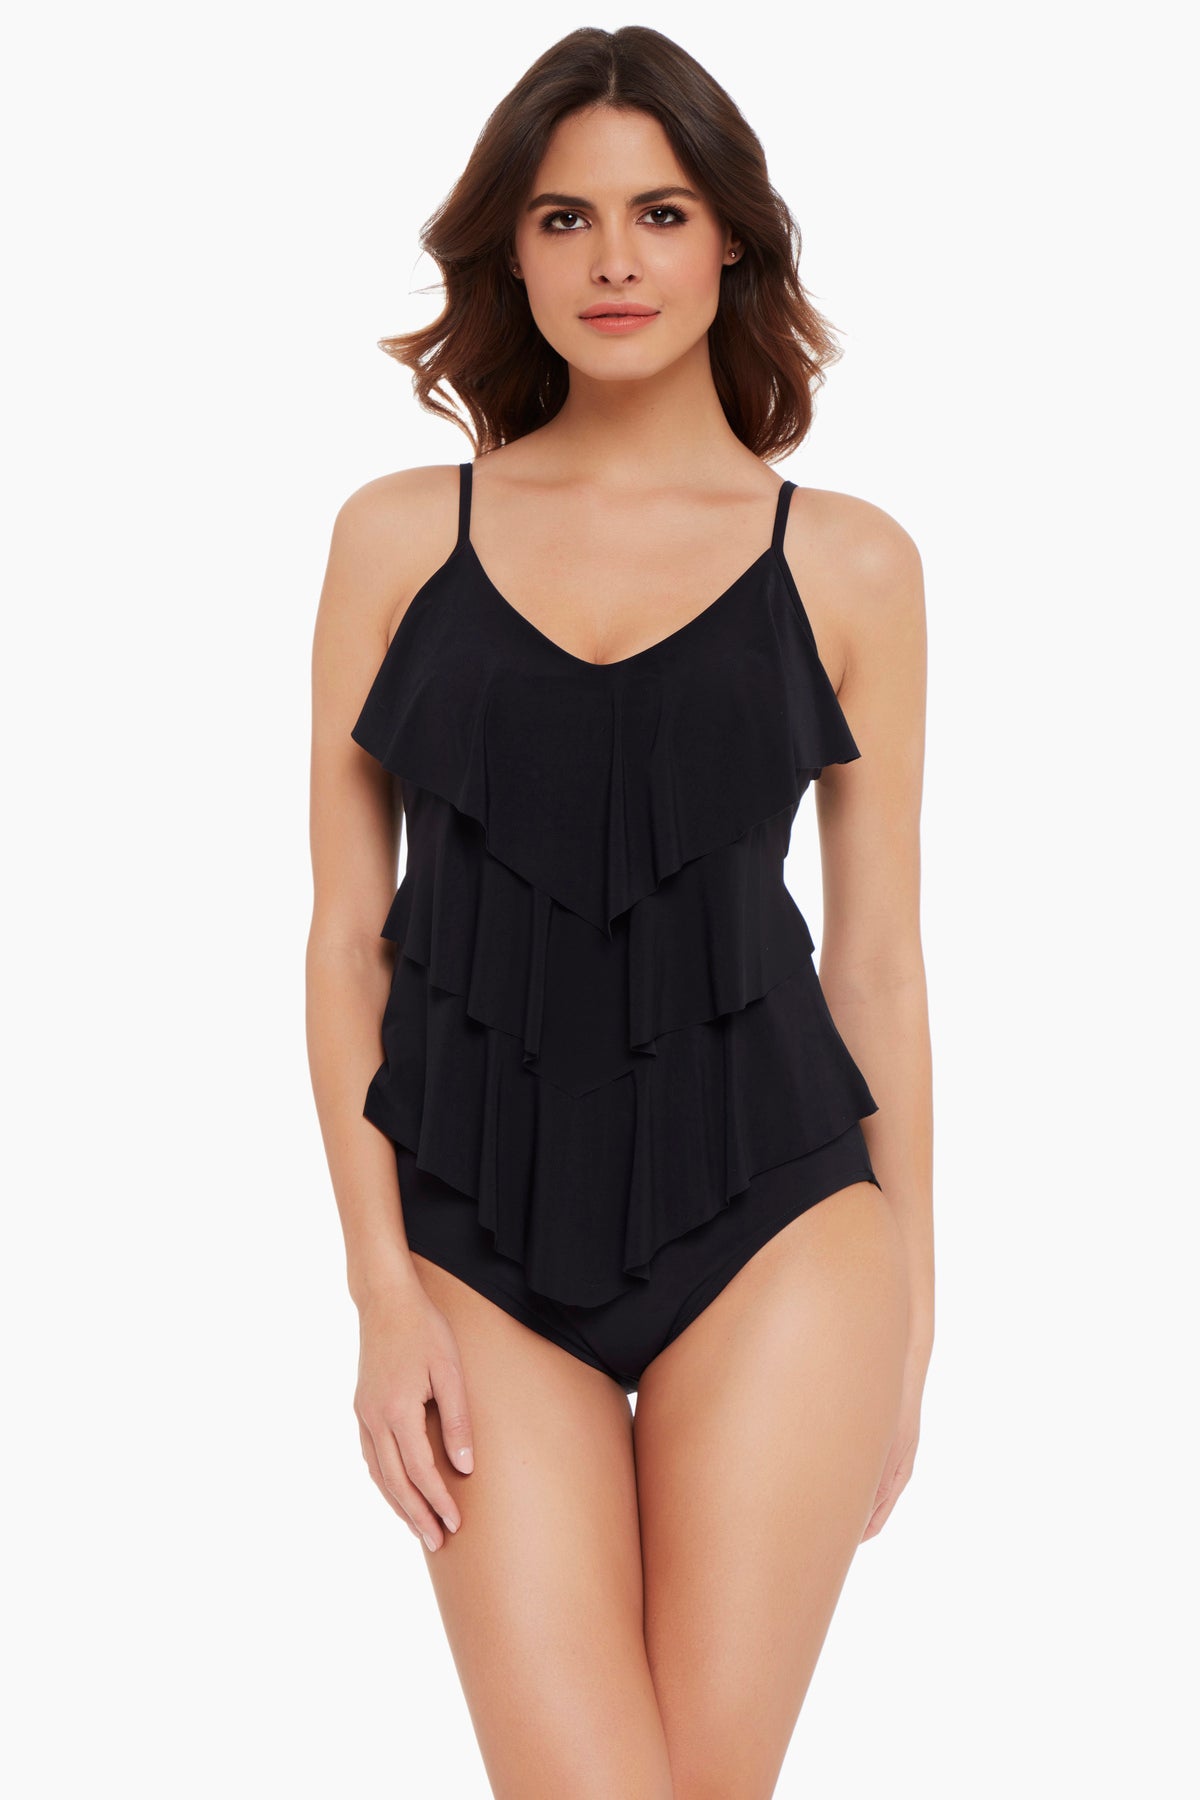 Miraclesuit Sub Rosa Sanibel One Piece Swimsuit DDD-Cup